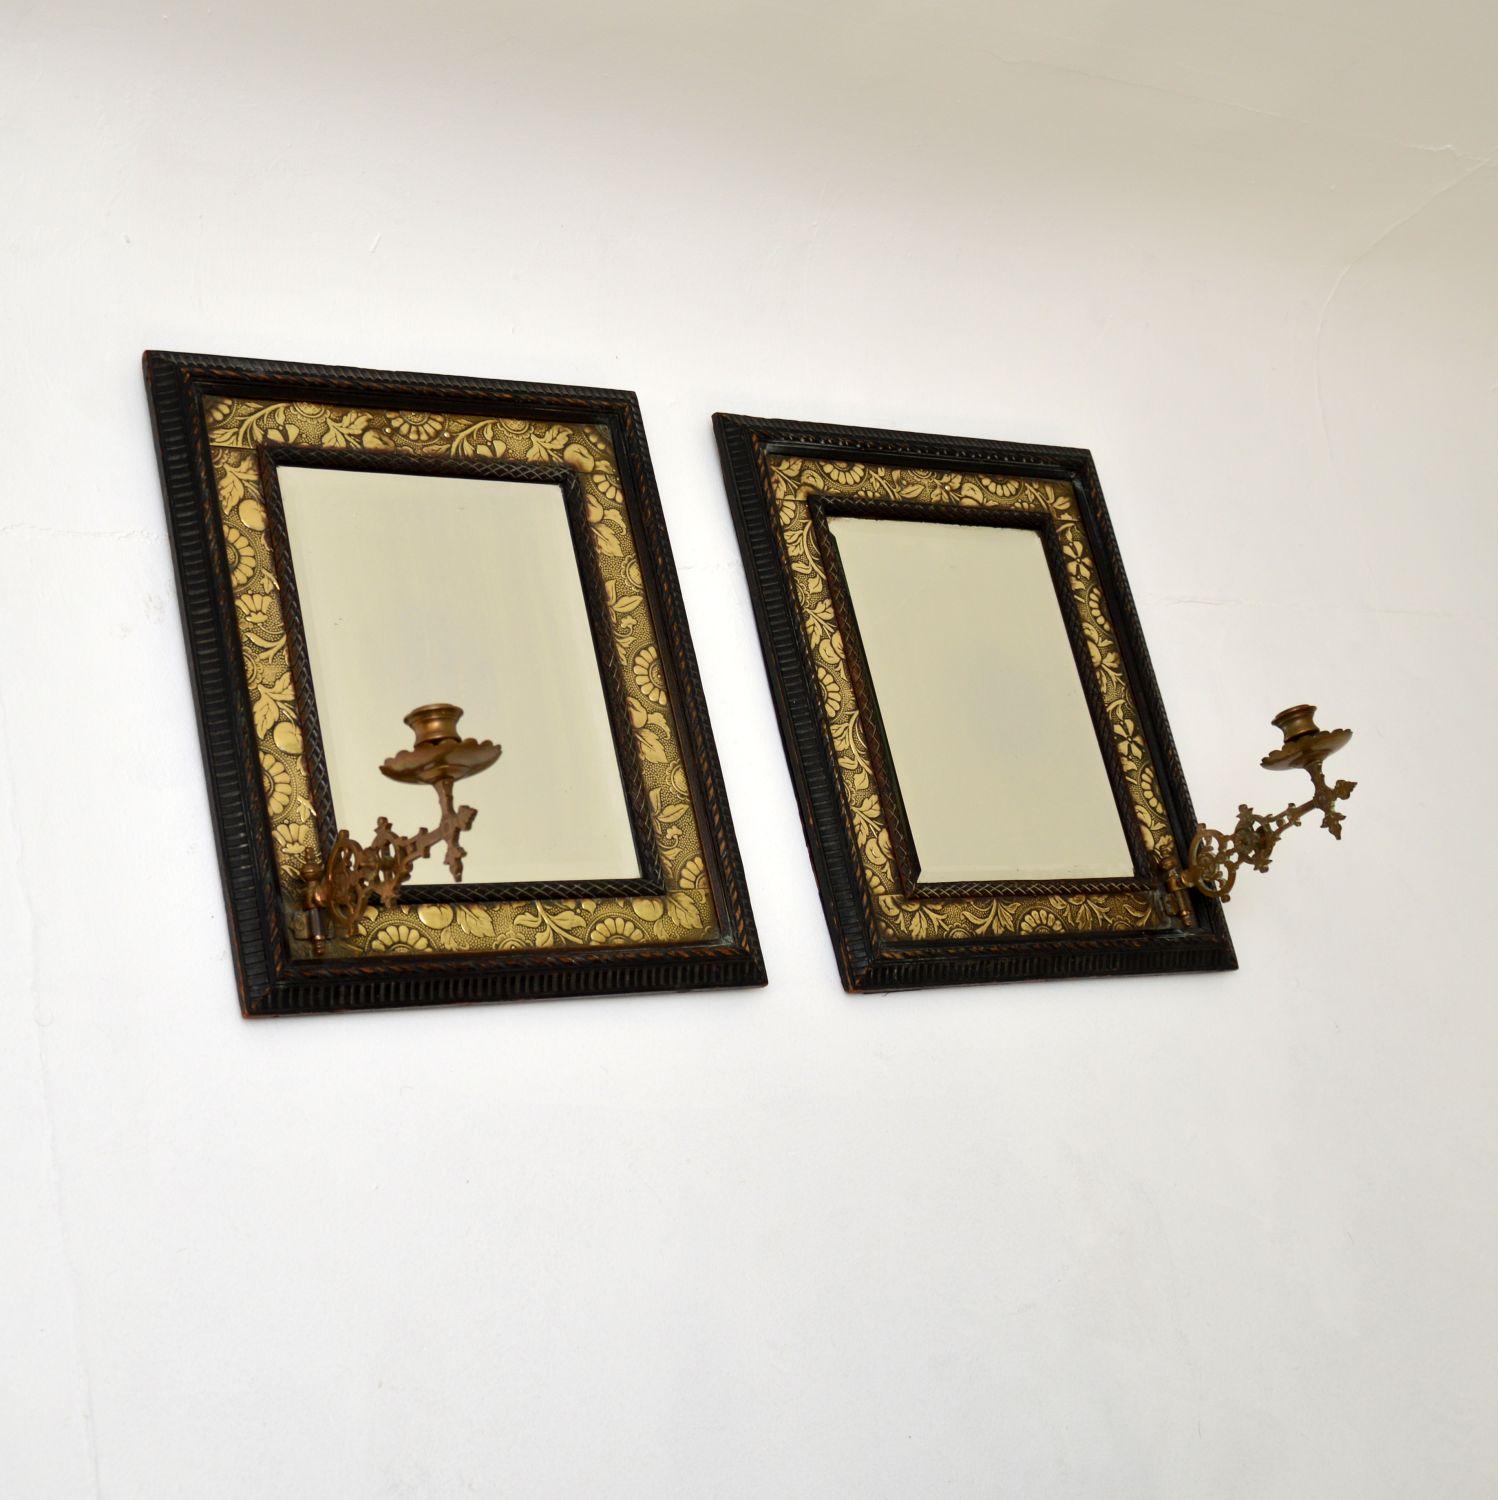 A superb pair of original antique Victorian bevelled mirrors in brass and carved ebonized wood frames. They were made in England, they date from the 1880s period.

They have quite an unusual design and are of amazing quality. Each has beautifully